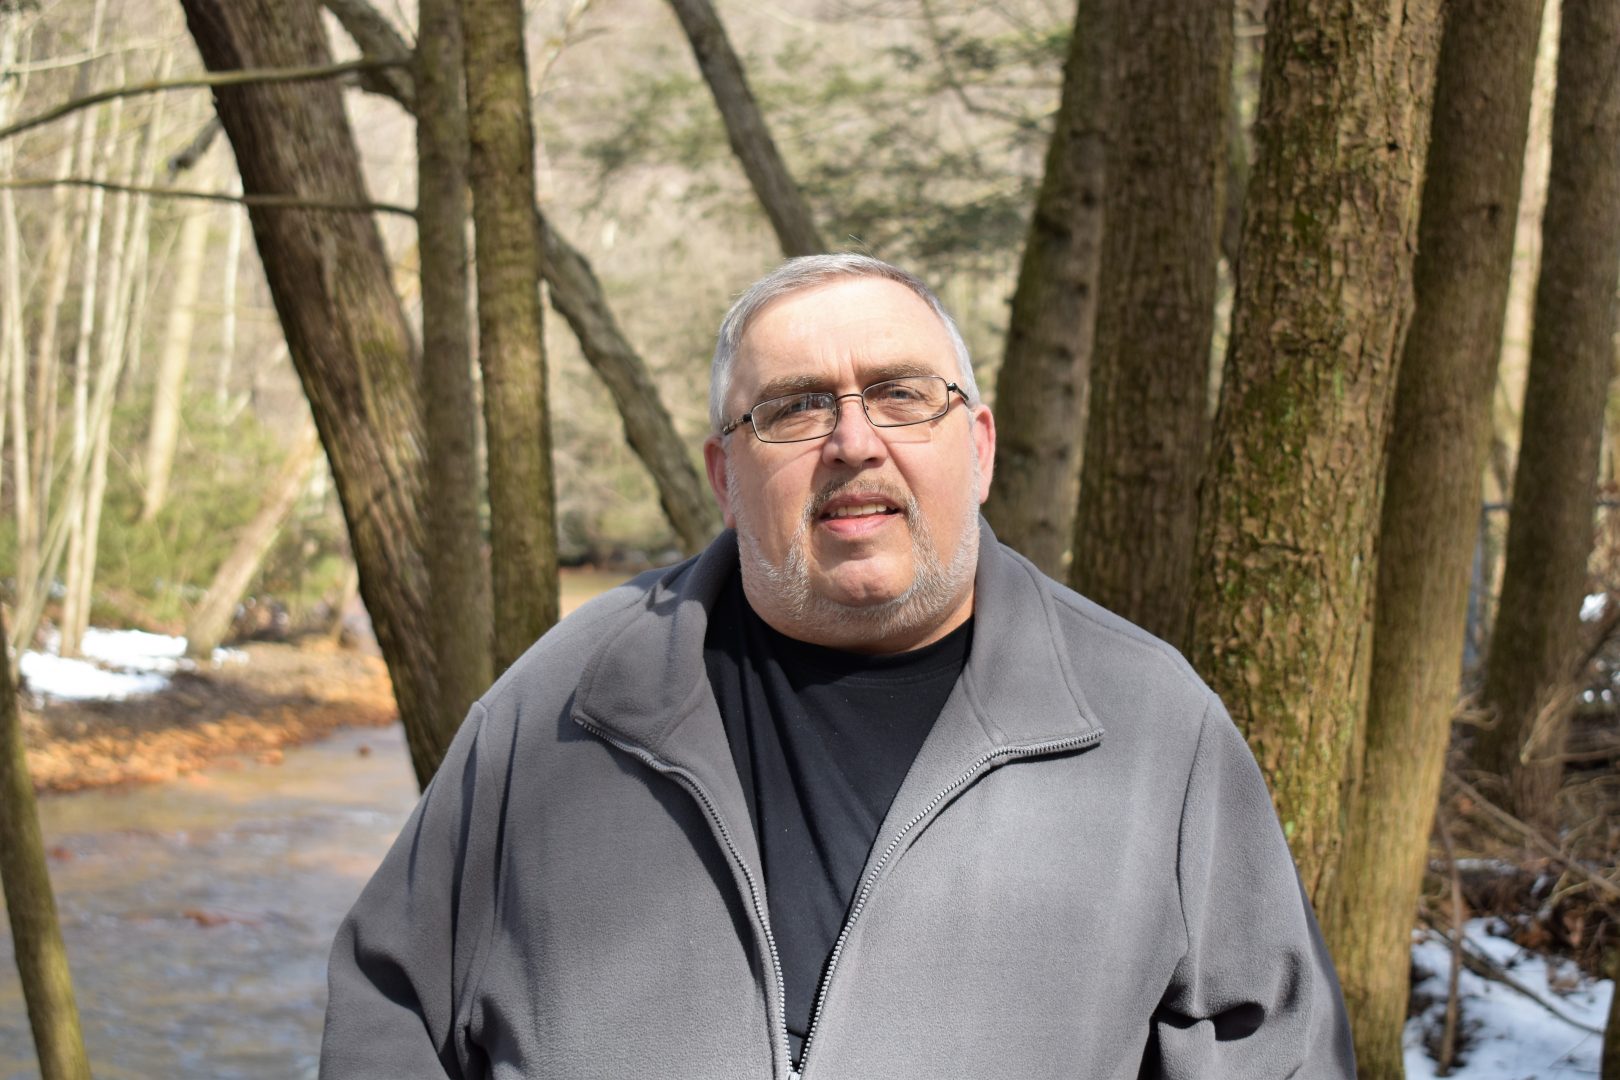 Bob Smith stands in the backyard of his home in Schuylkill County on March 11, 2019. He asked PA Post whether something can be done about Pennsylvania's property taxes.